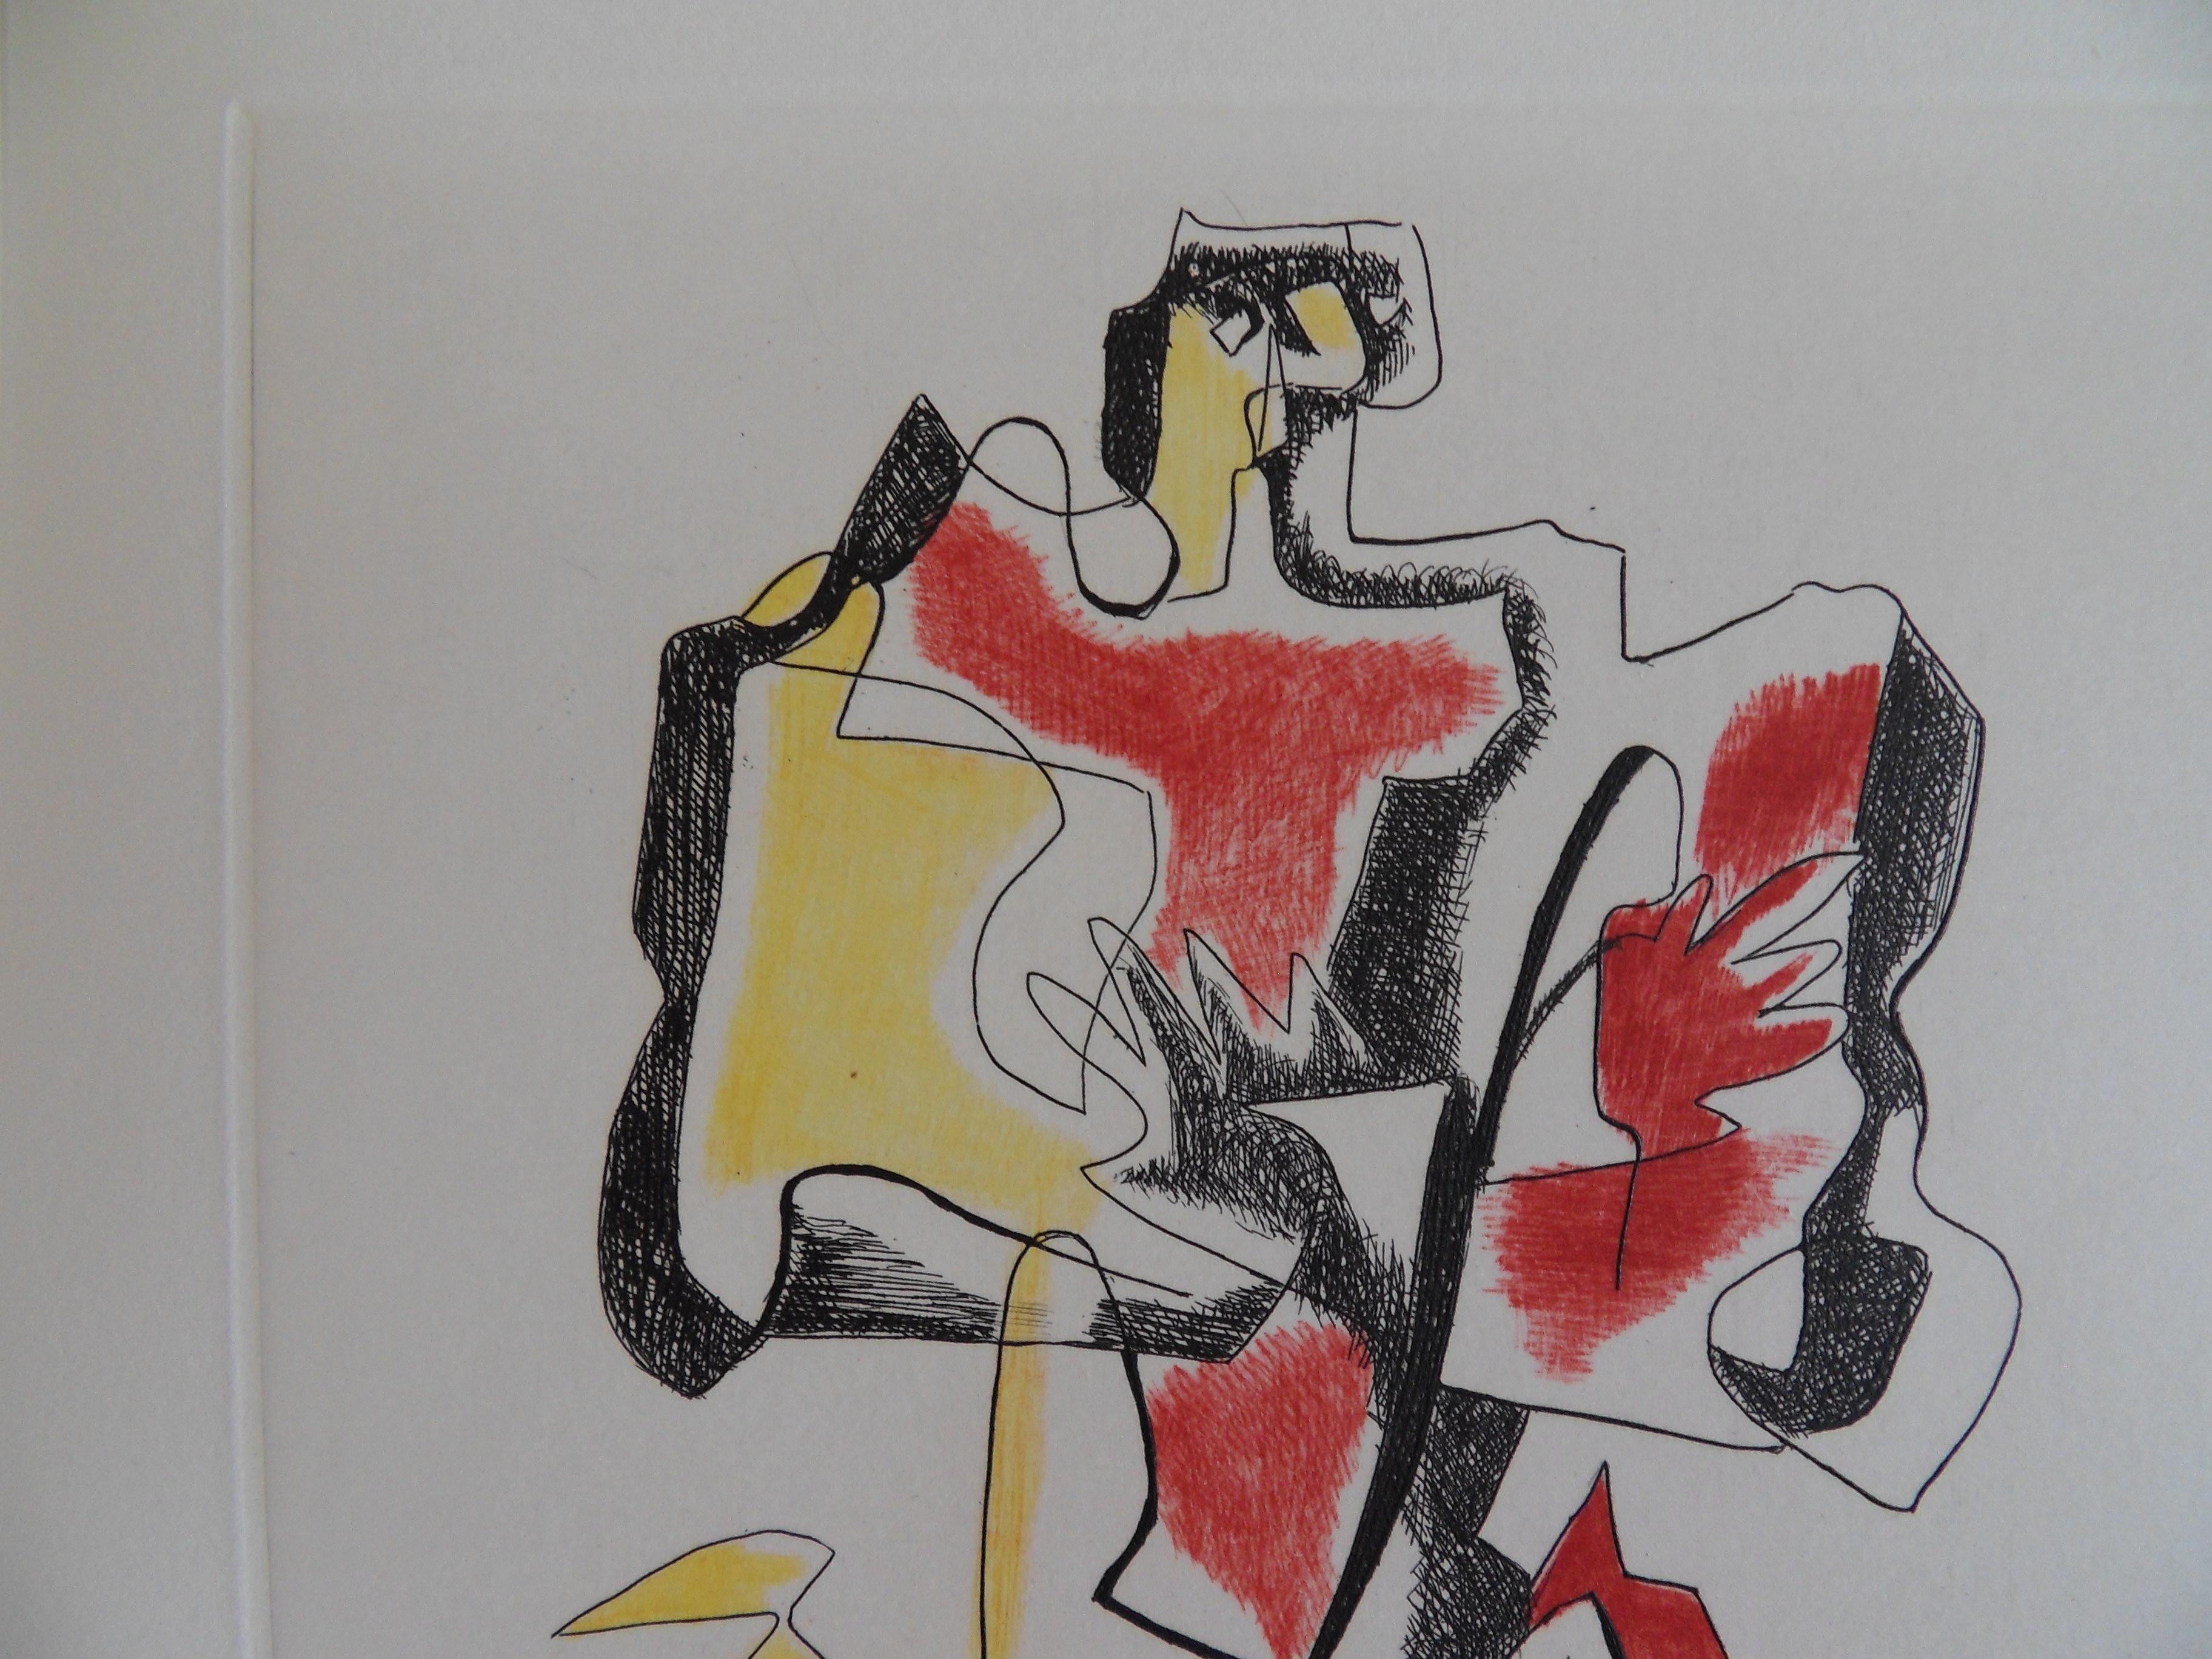 Man in Yellow and Red - Surrealist Original Etching - Gray Figurative Print by Ossip Zadkine